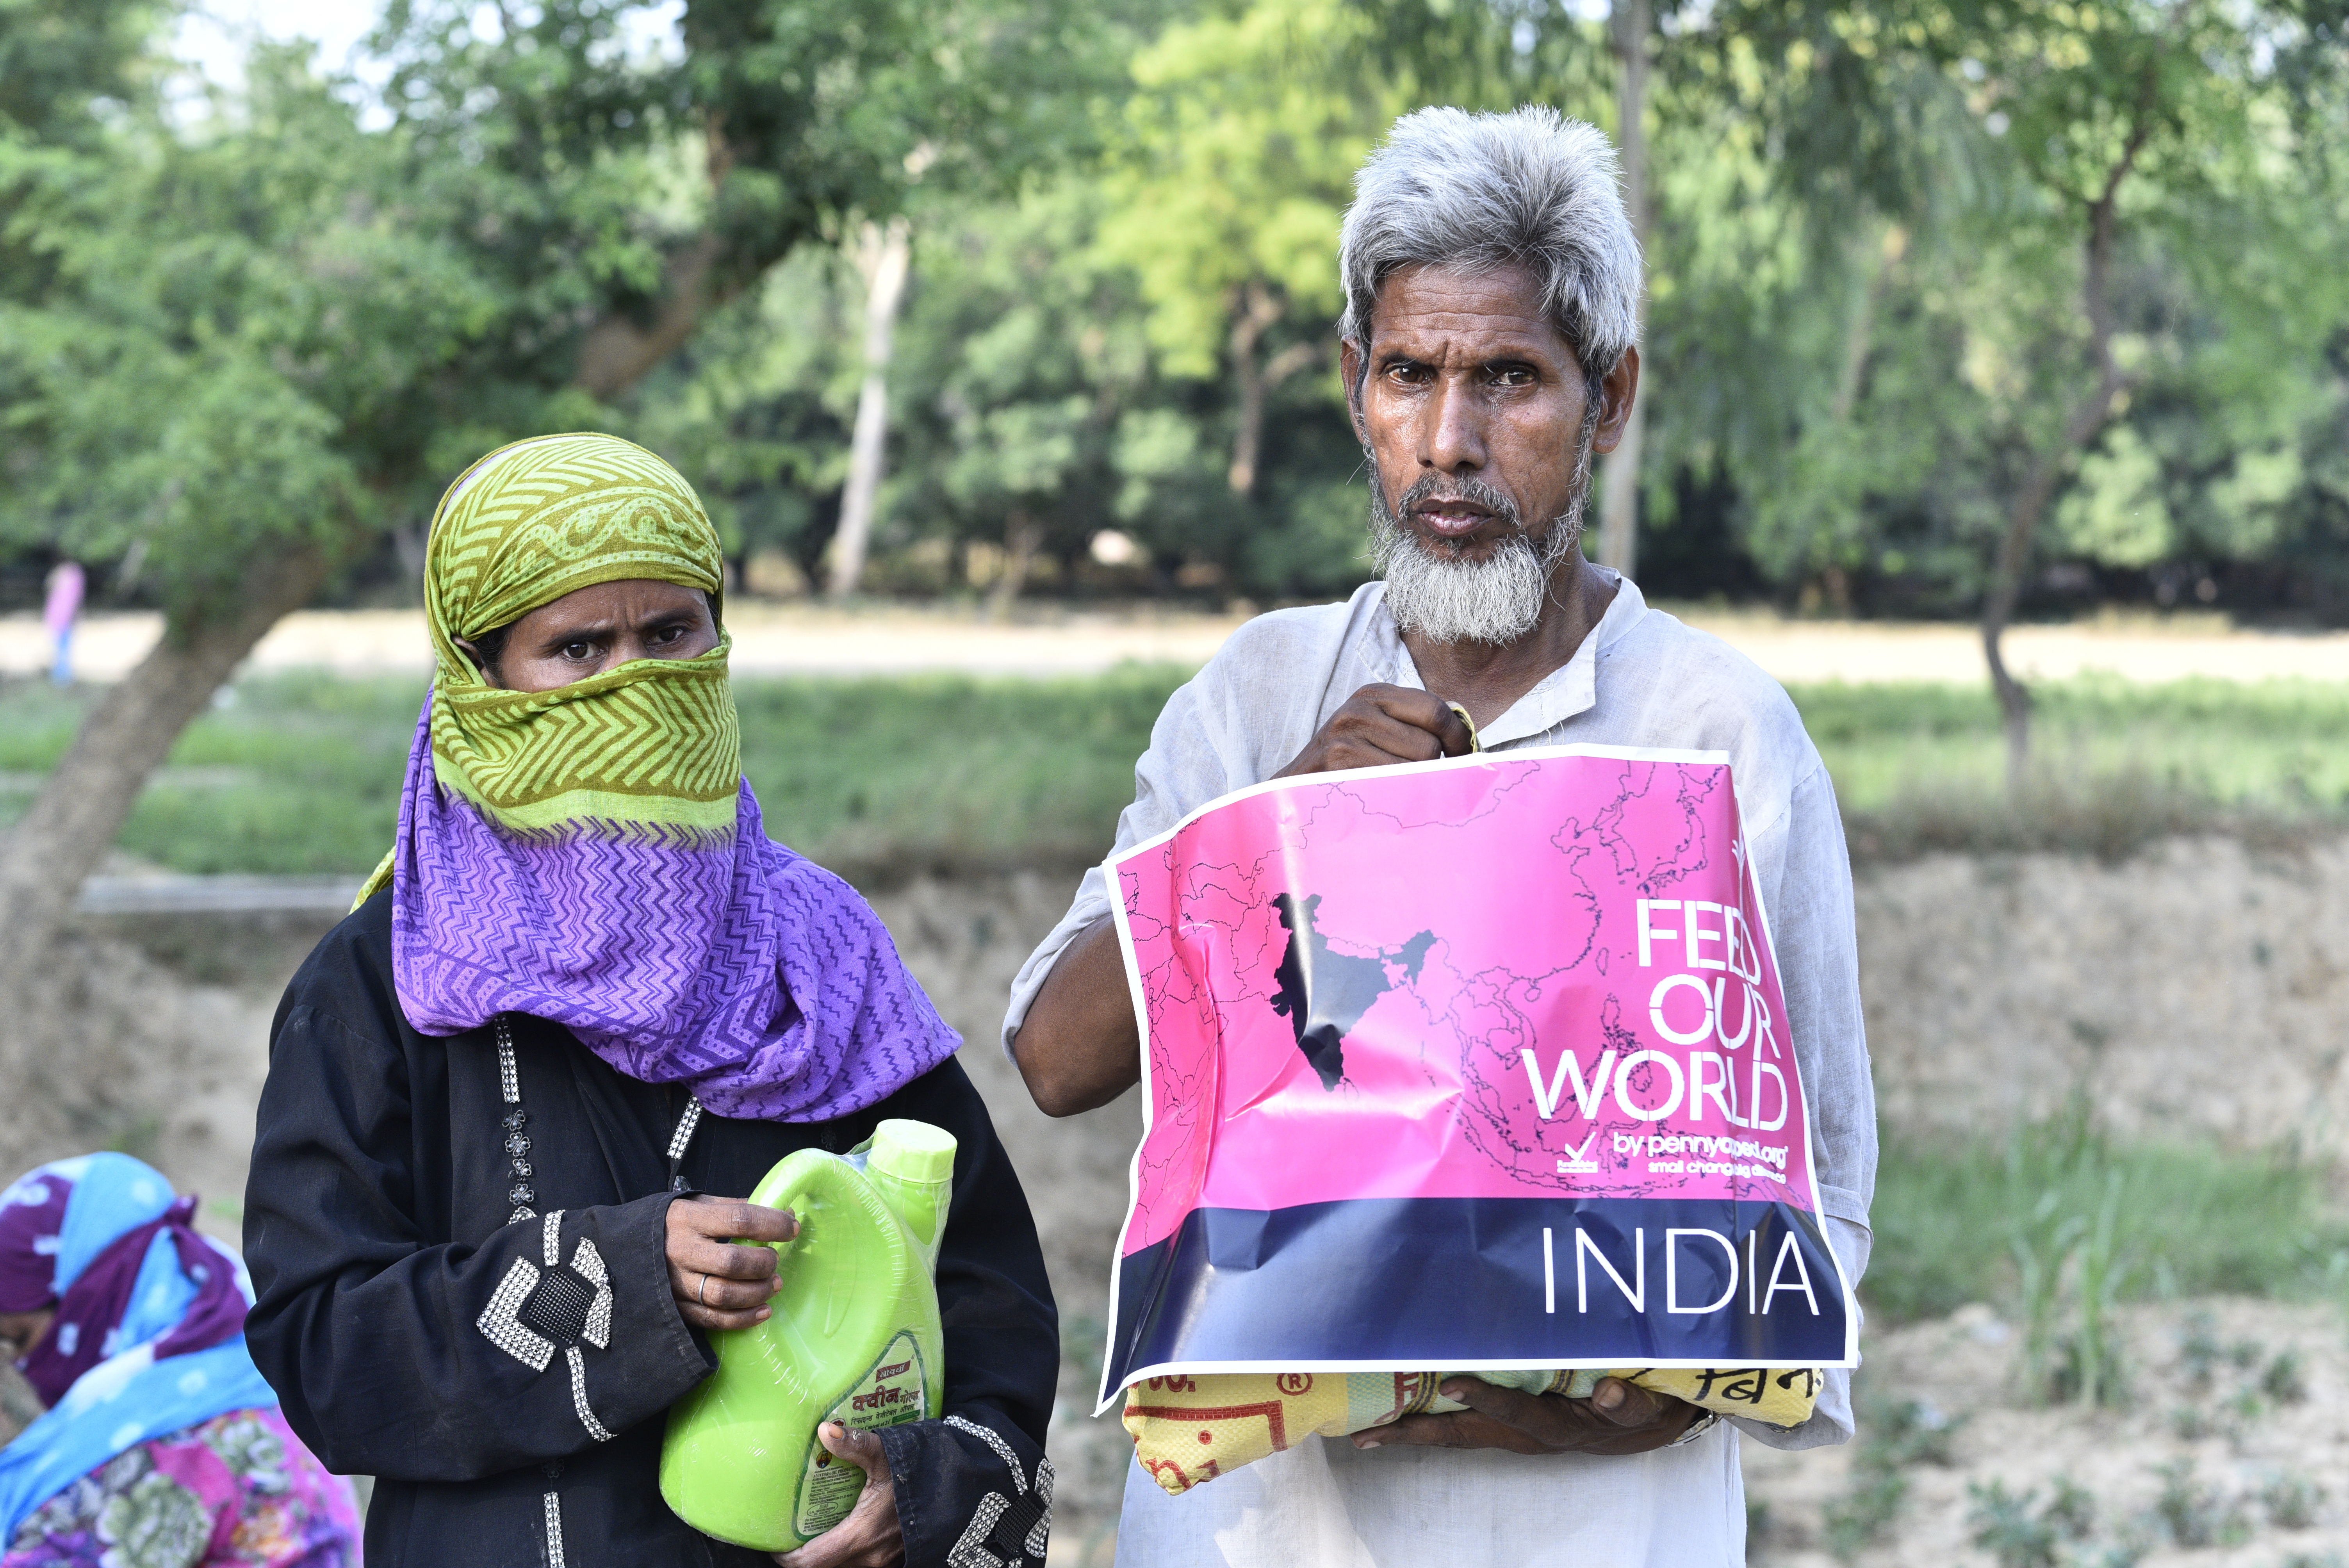 Khadeejah and Mohammed in Mawai, India after having received their culturally-sensitive food pack to provide them meals during the month of fasting, Ramadan.